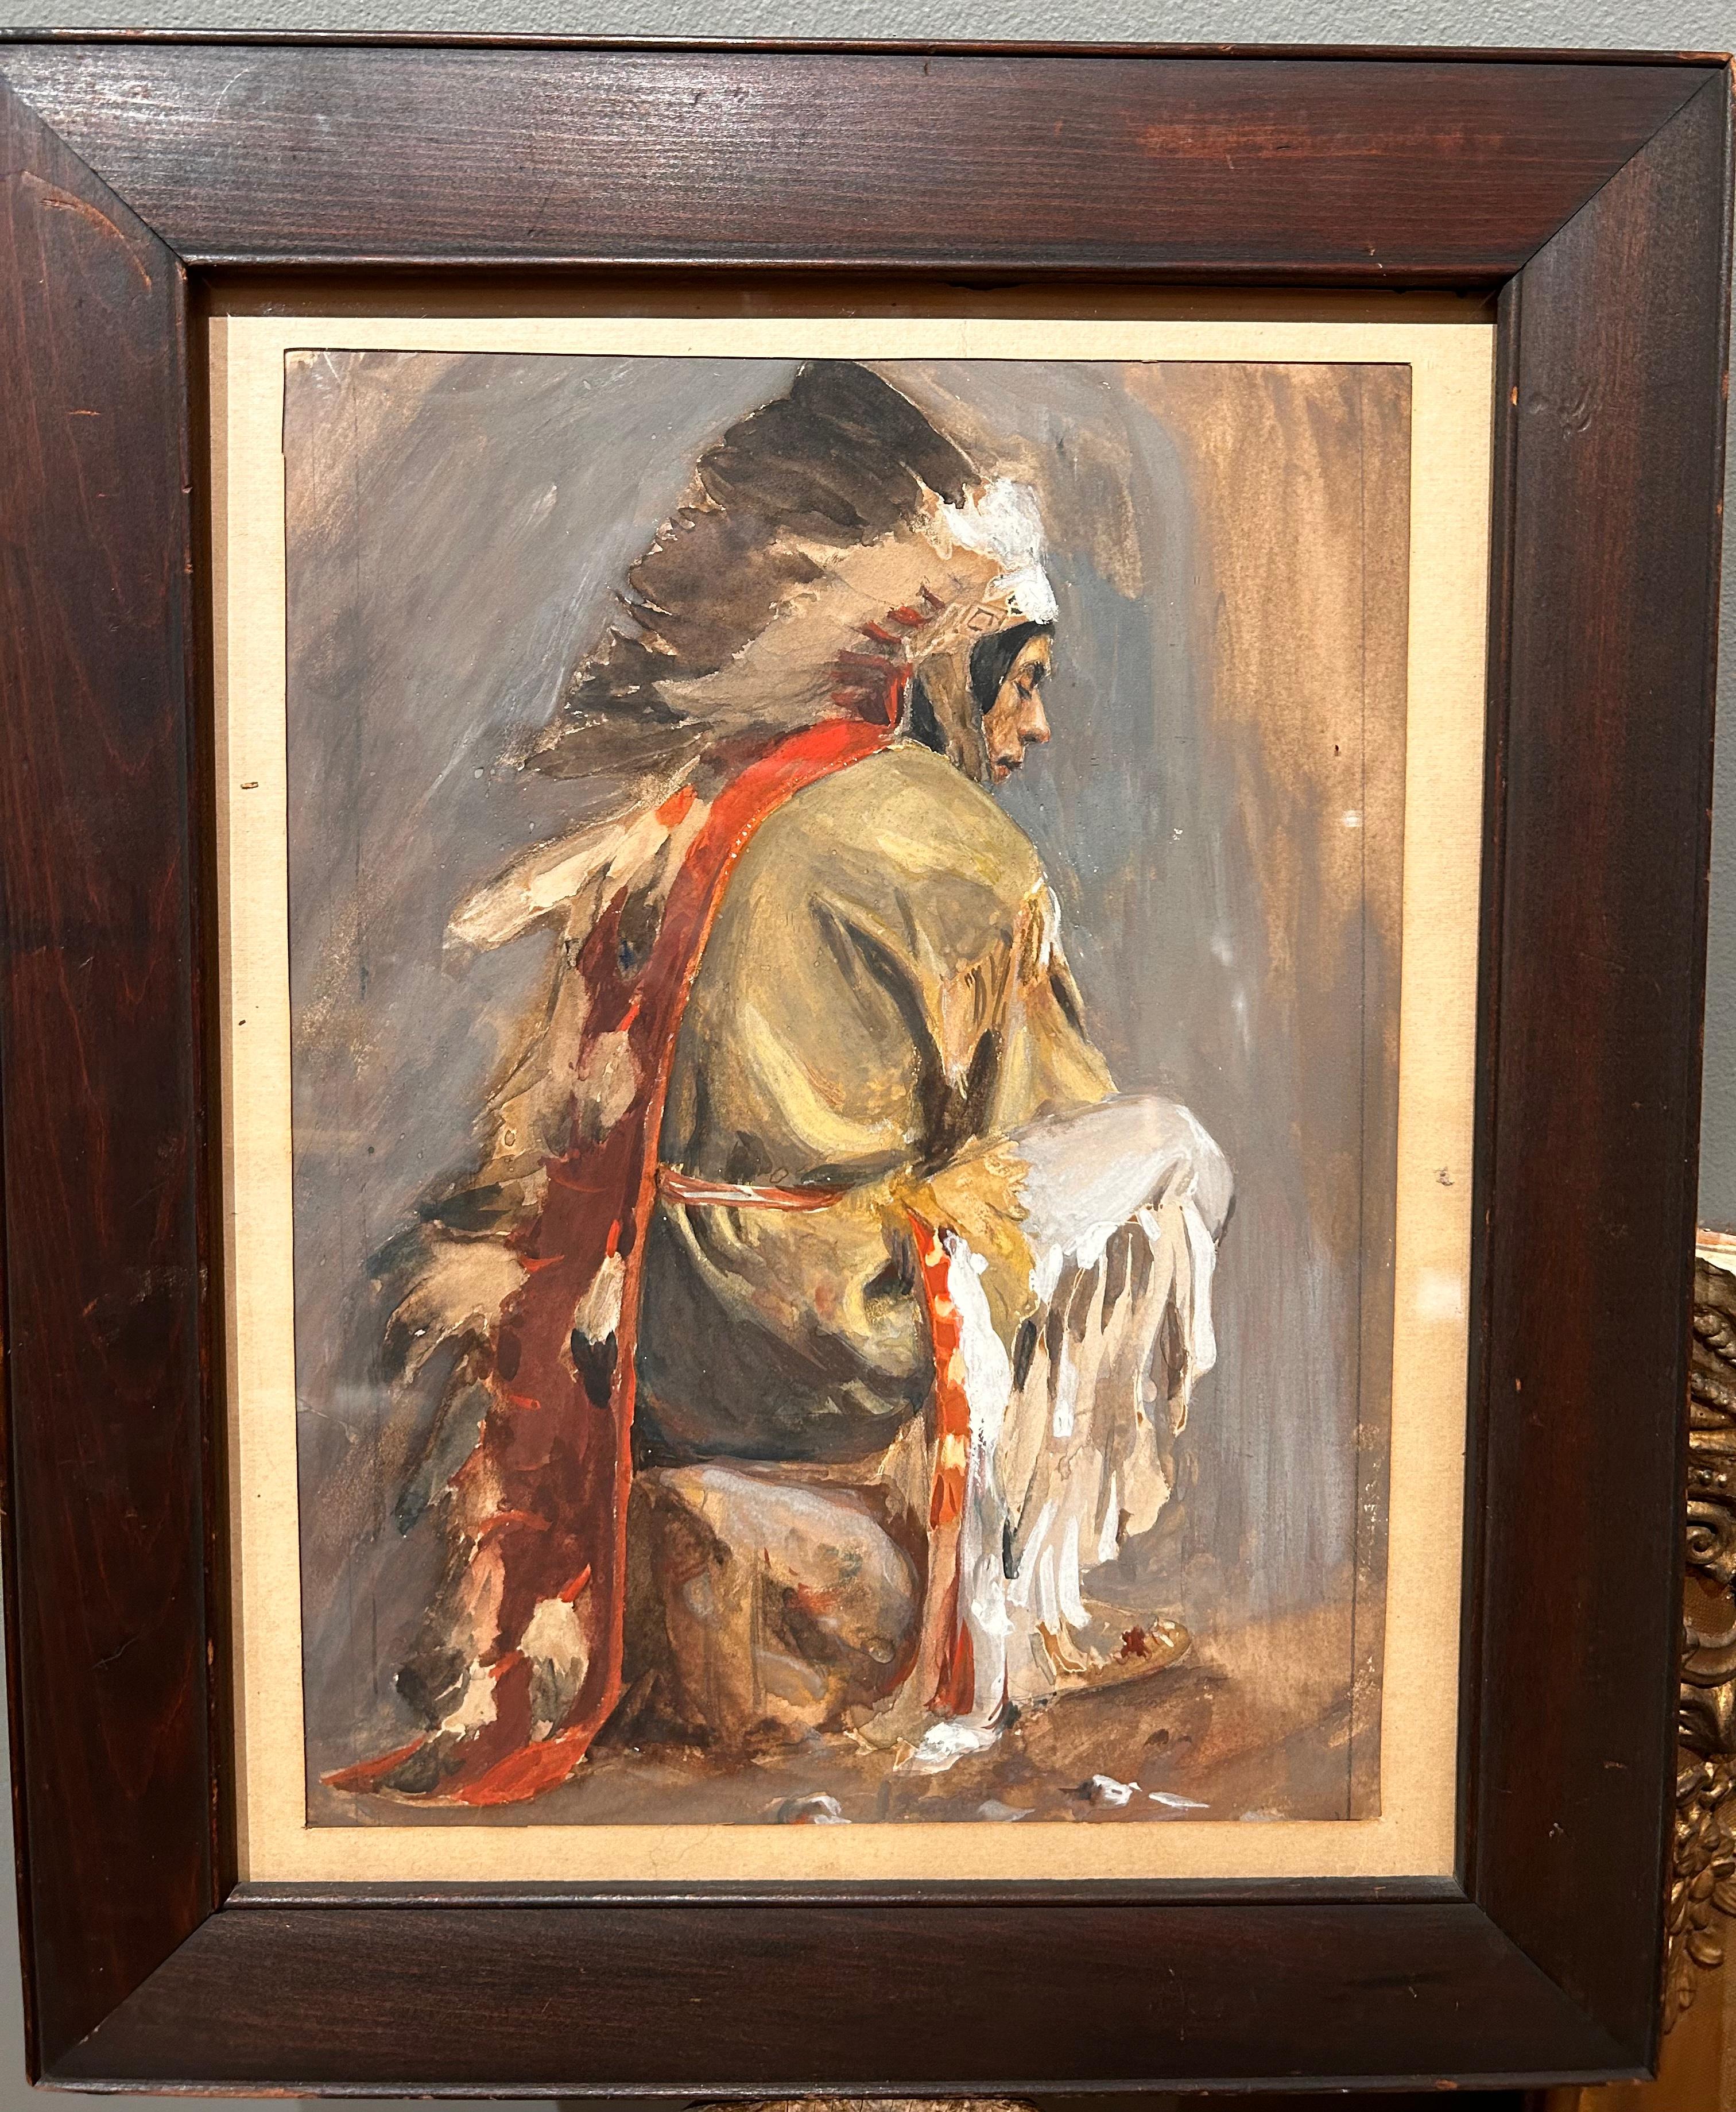 George de Forest Brush  Portrait Painting - Portrait of Native American Man in Traditional Clothing